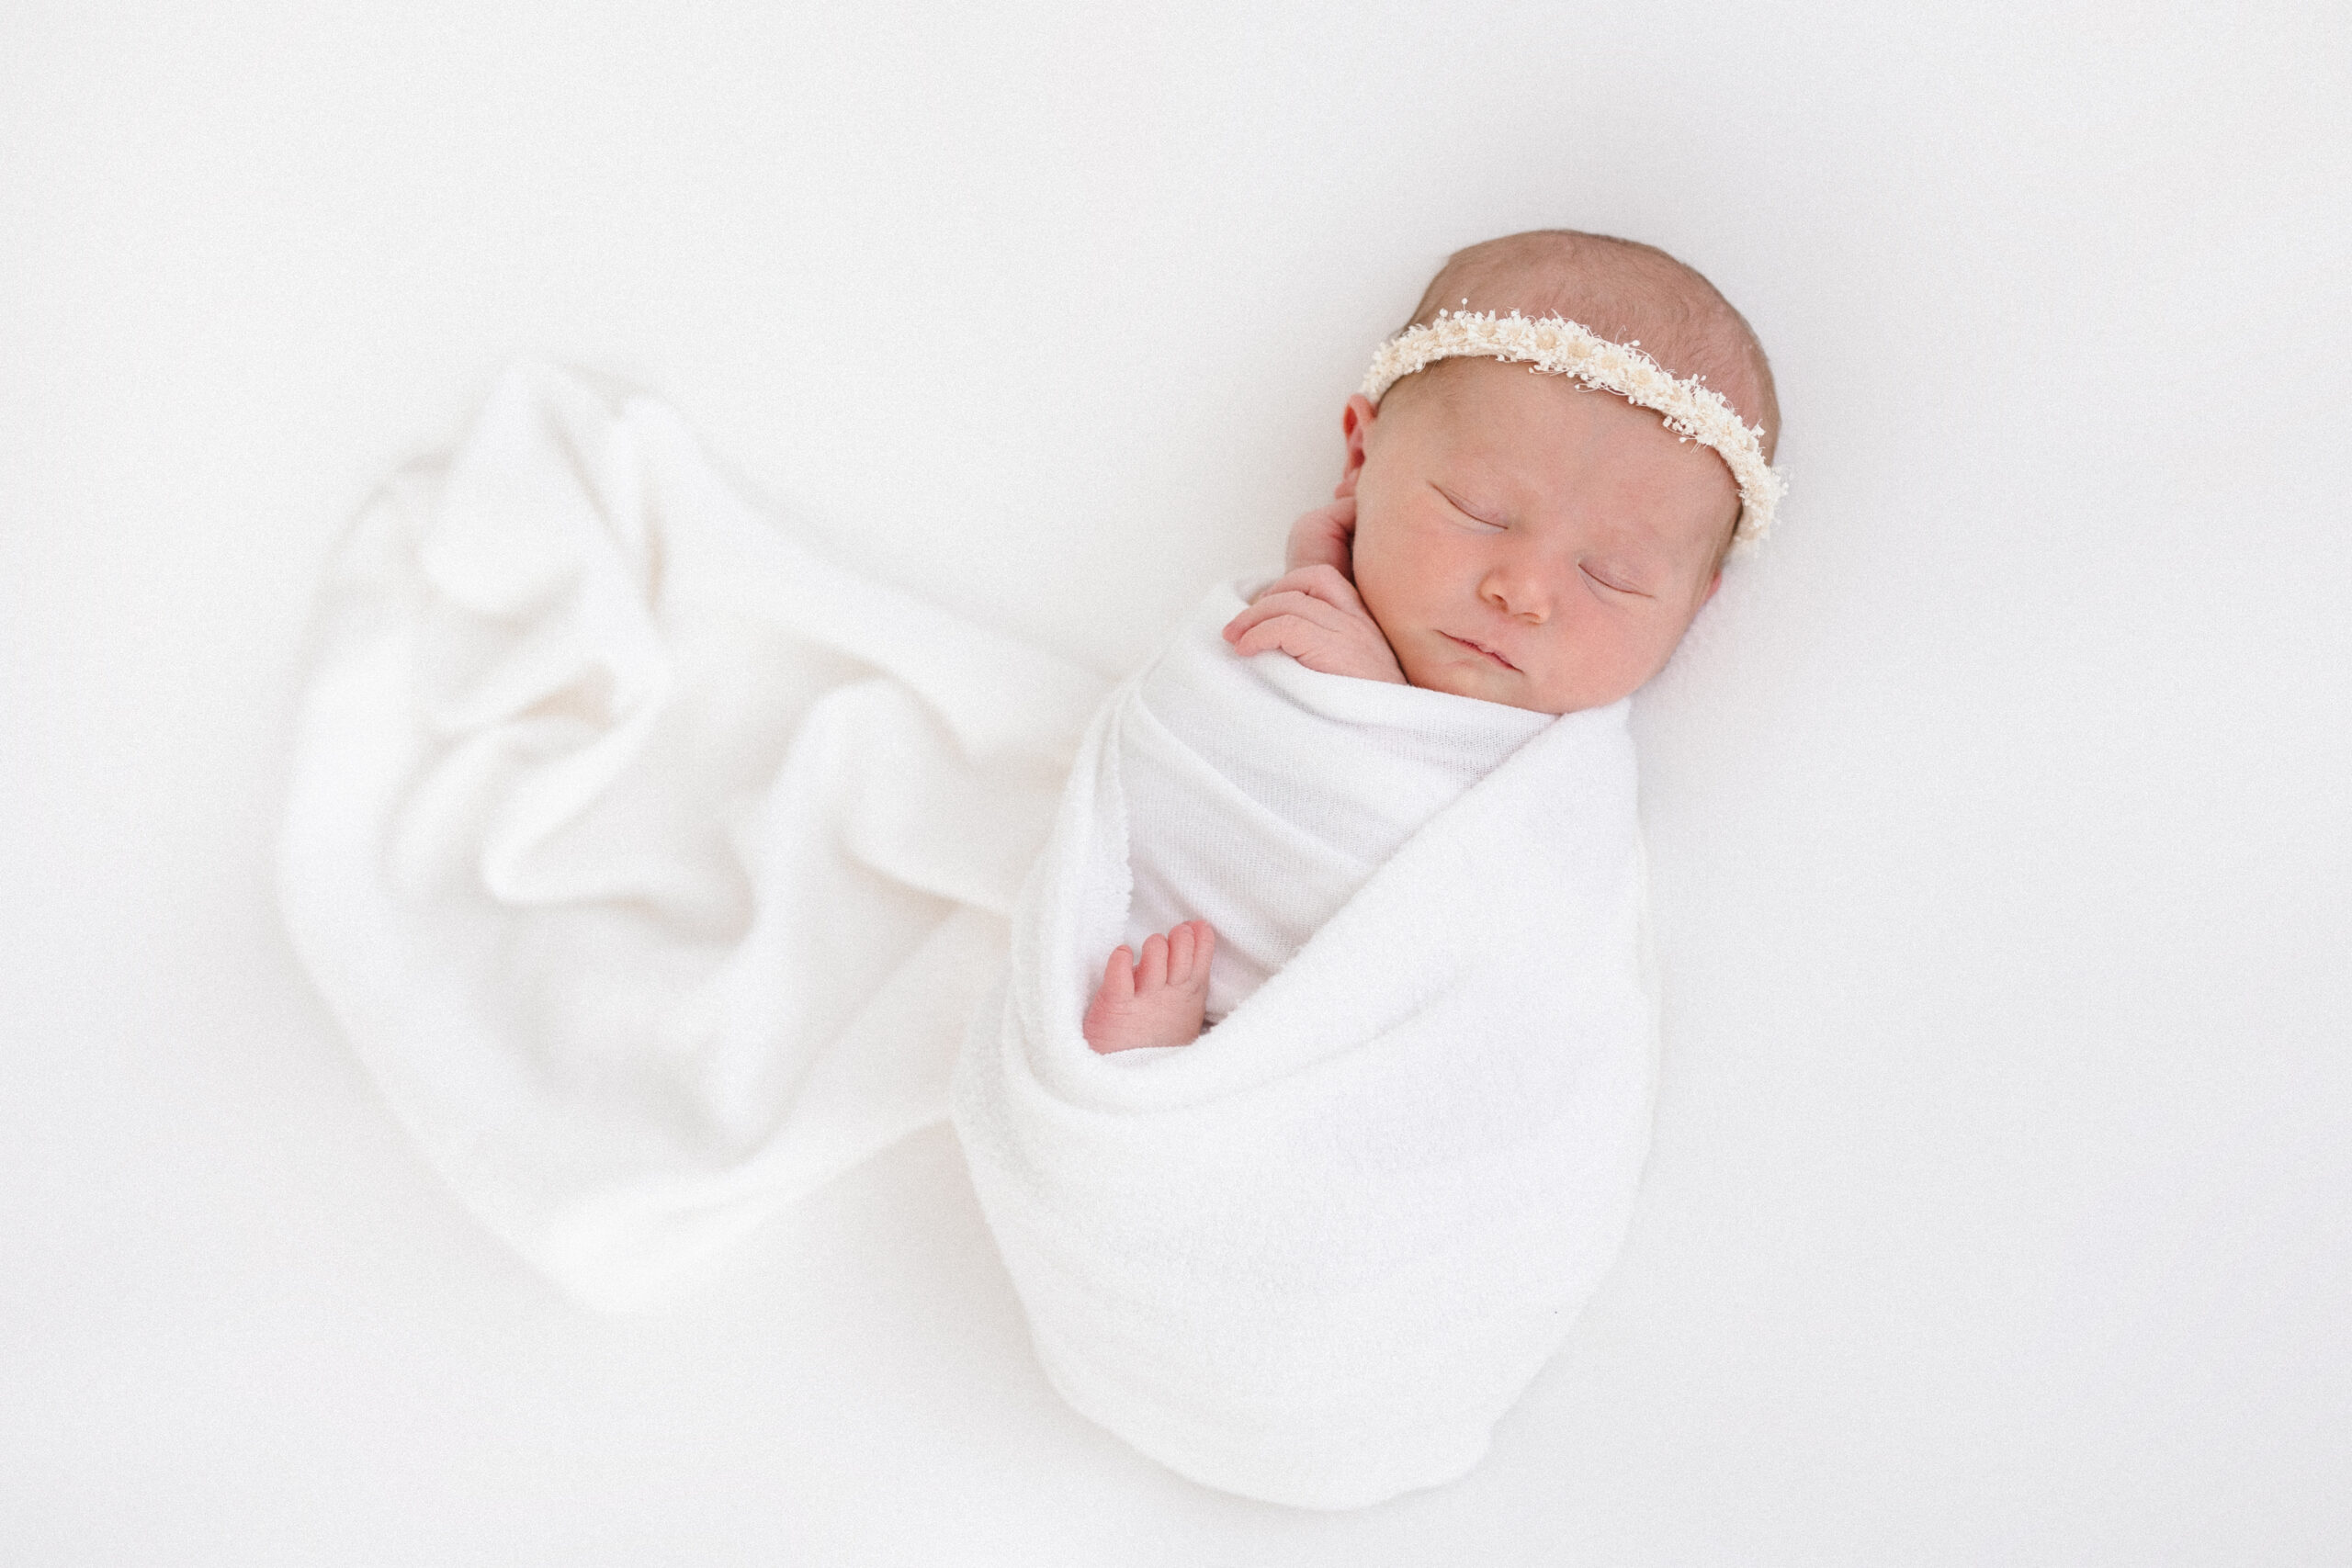 Baby girl swaddled in a white blanket as she sleeps with her hands by her face